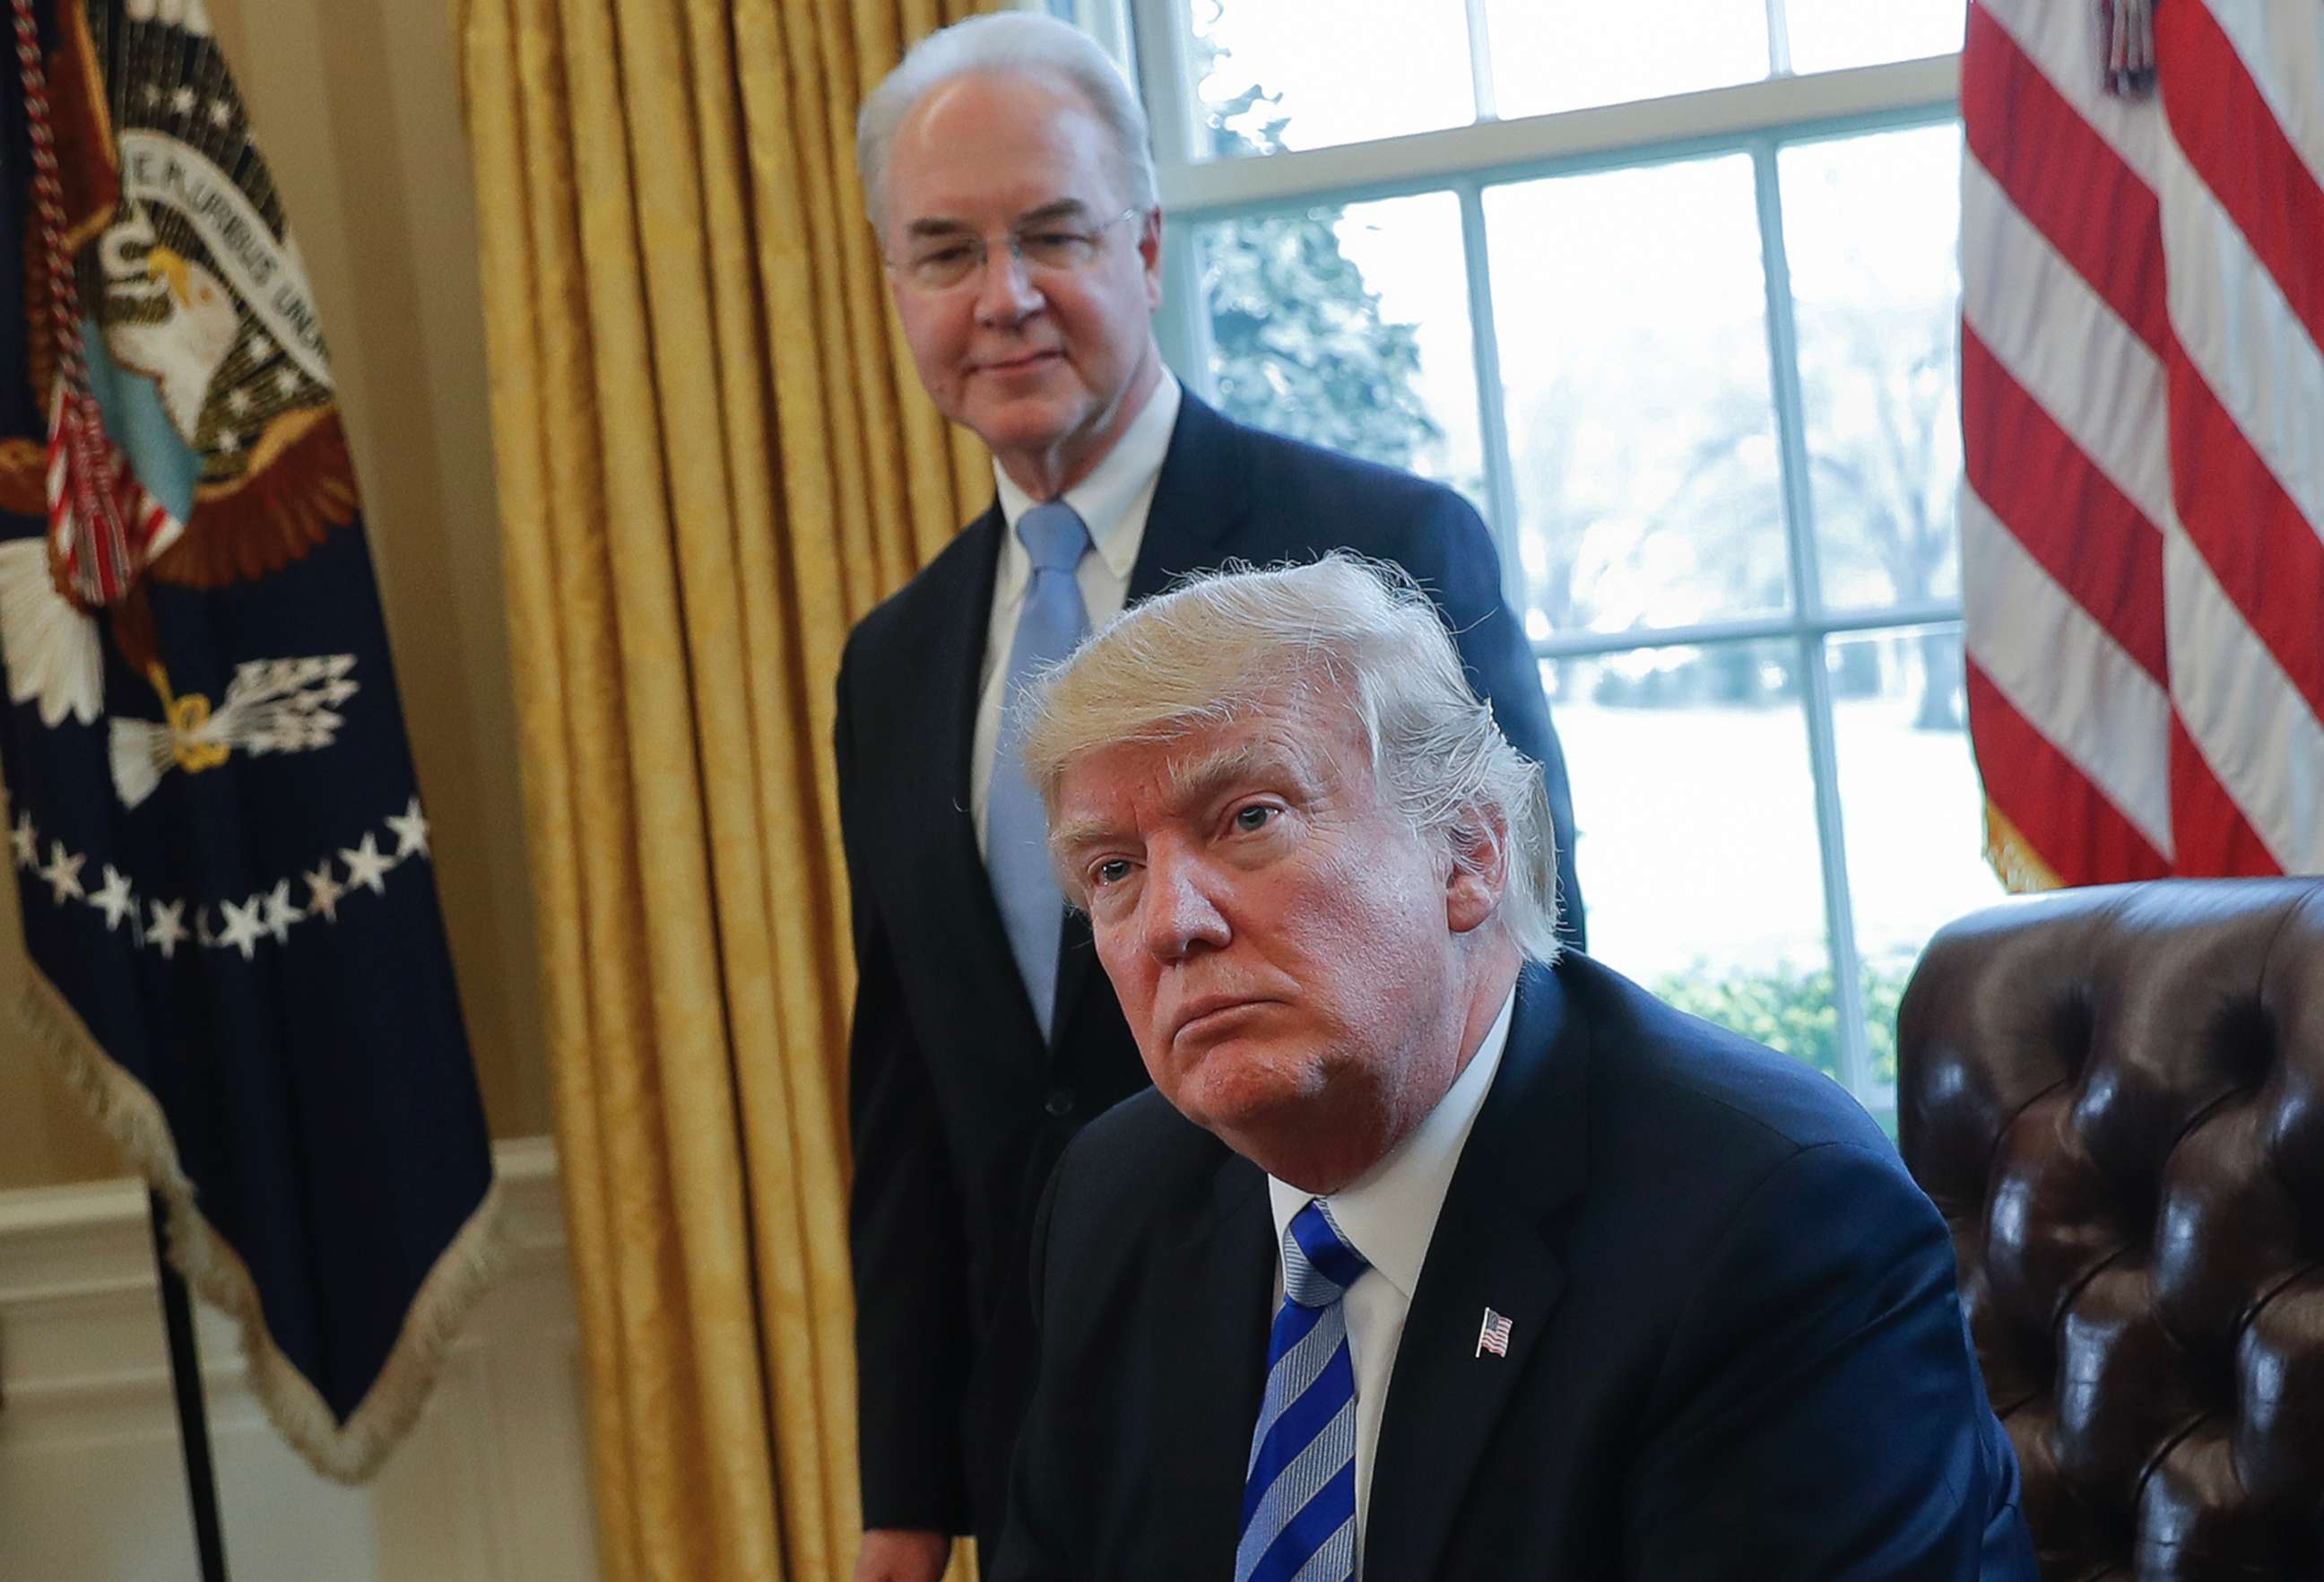 PHOTO: President Donald Trump is pictured with Health and Human Services Secretary Tom Price are seen in the Oval Office of the White House in Washington, March 24, 2017.